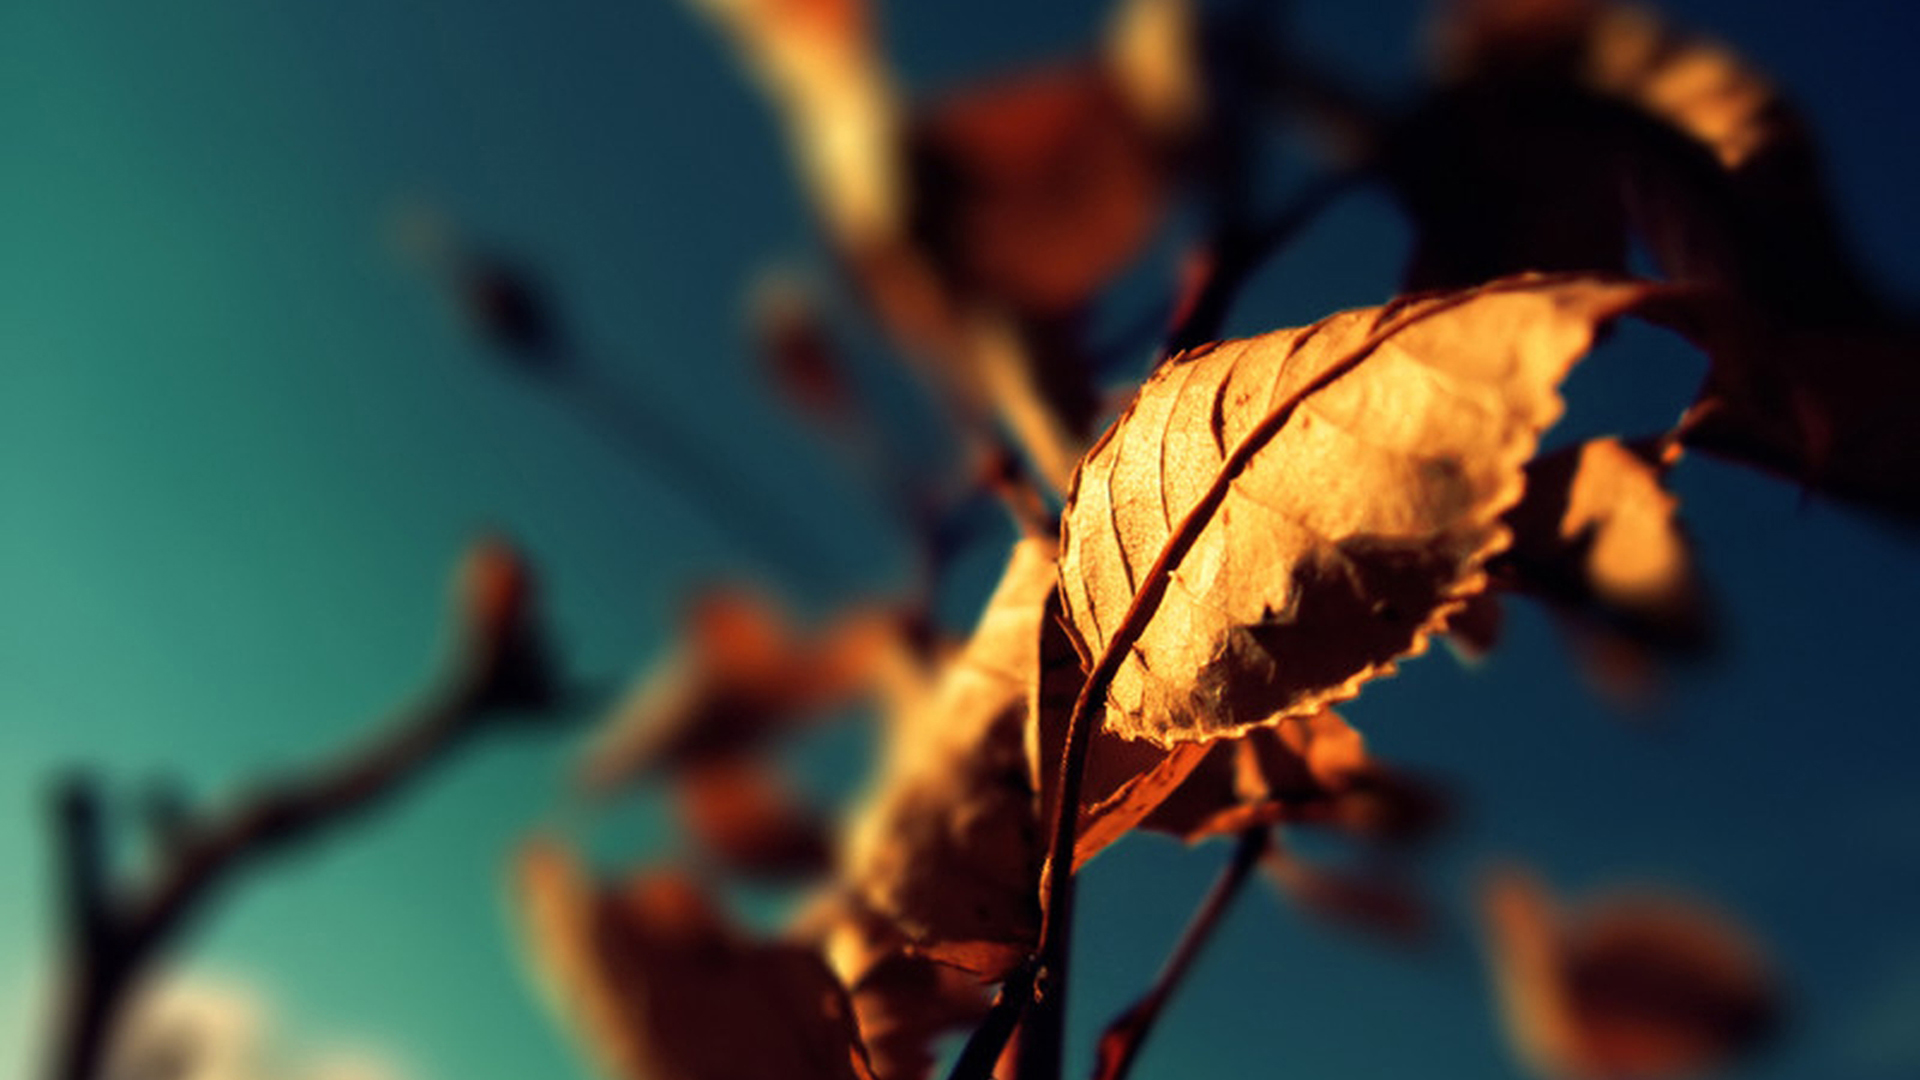 photography wallpaper backgrounds,leaf,branch,blue,green,sky